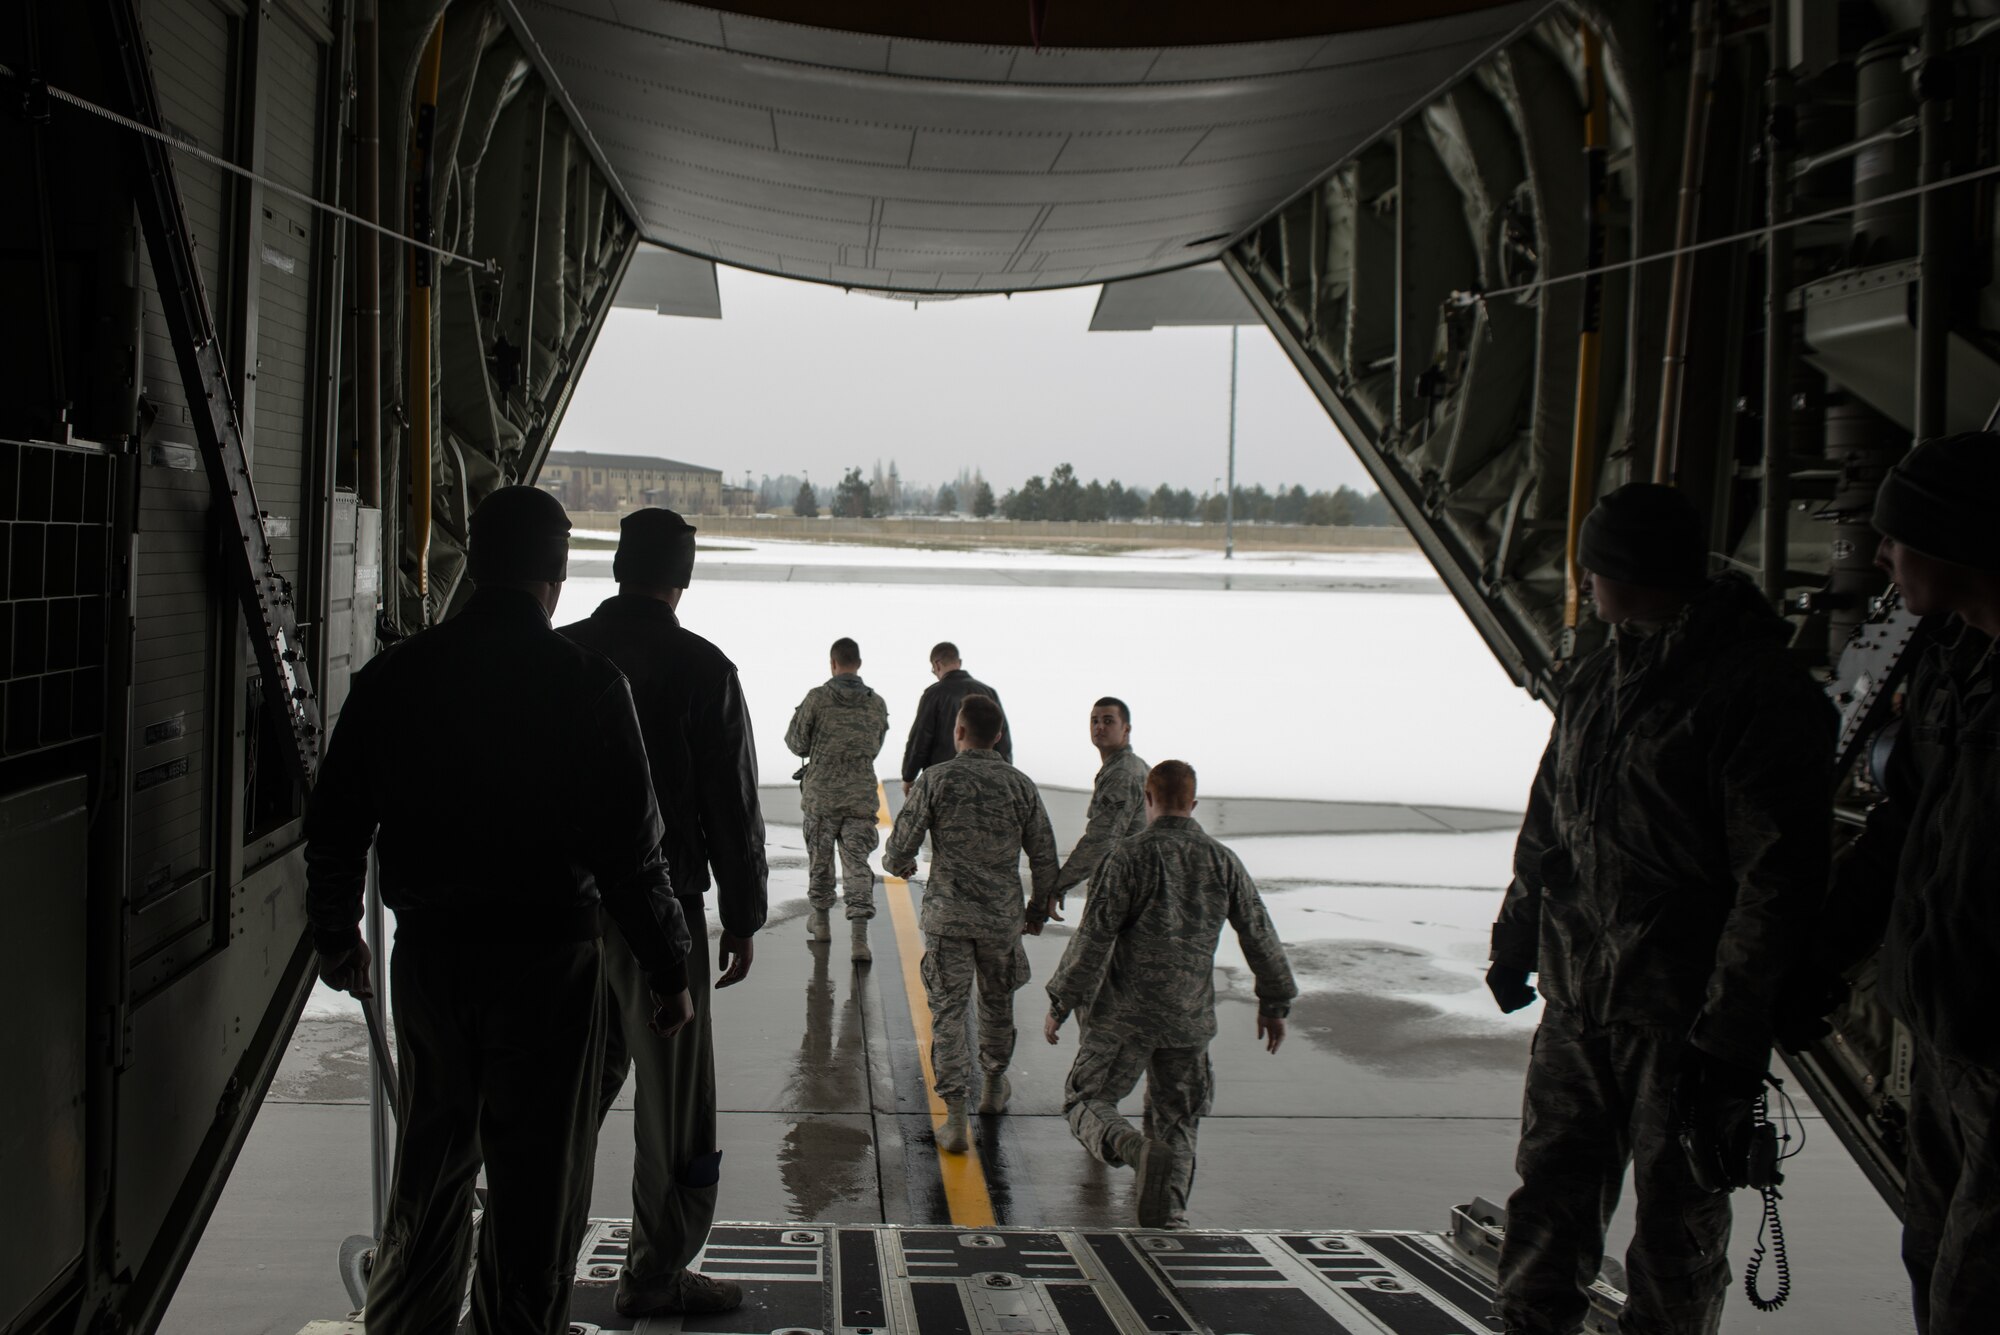 336th Training Group Airmen exit a C-130J Super Hercules aircraft after being given an orientation from the flight crew Nov. 20, 2014 at Fairchild Air Force Base, Wash. Members of the flight crew were part of a training flight from Kirkland AFB, New Mexico, with a loadmaster from Moody AFB, Georgia. (U.S. Air Force photo/Staff Sgt. Alexandre Montes)